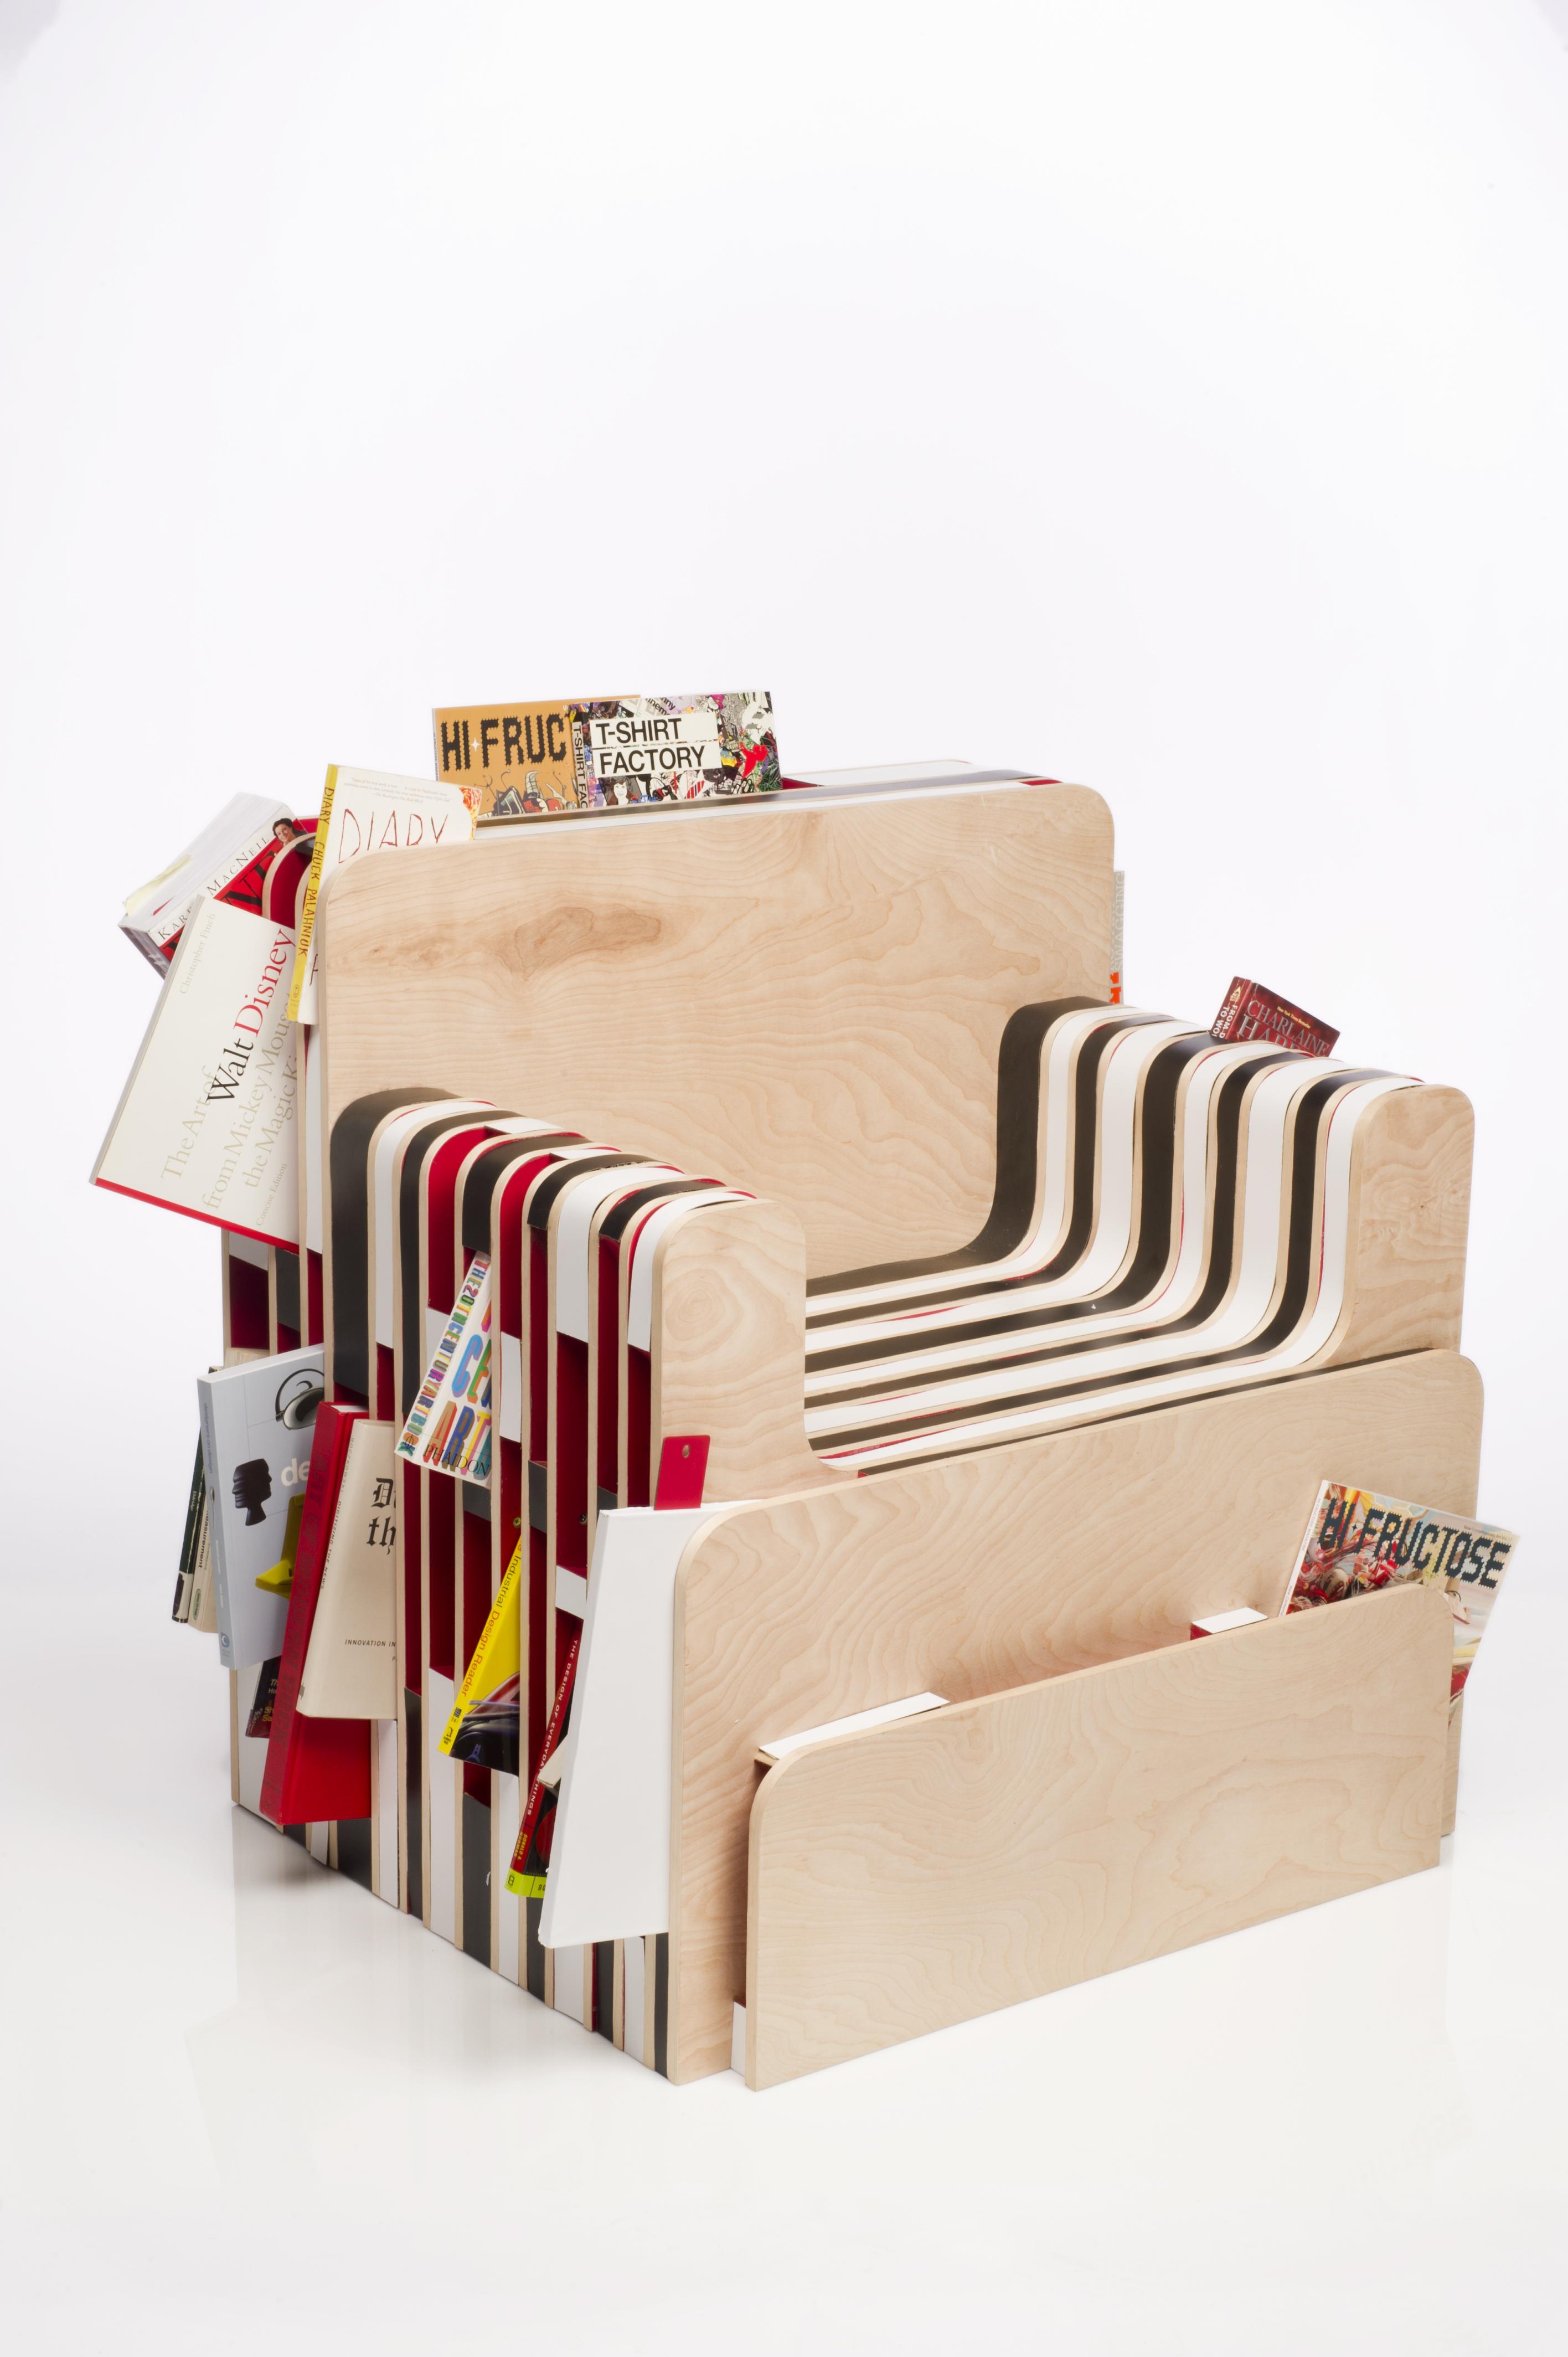 A wooden chair design mixed with different fabrics.